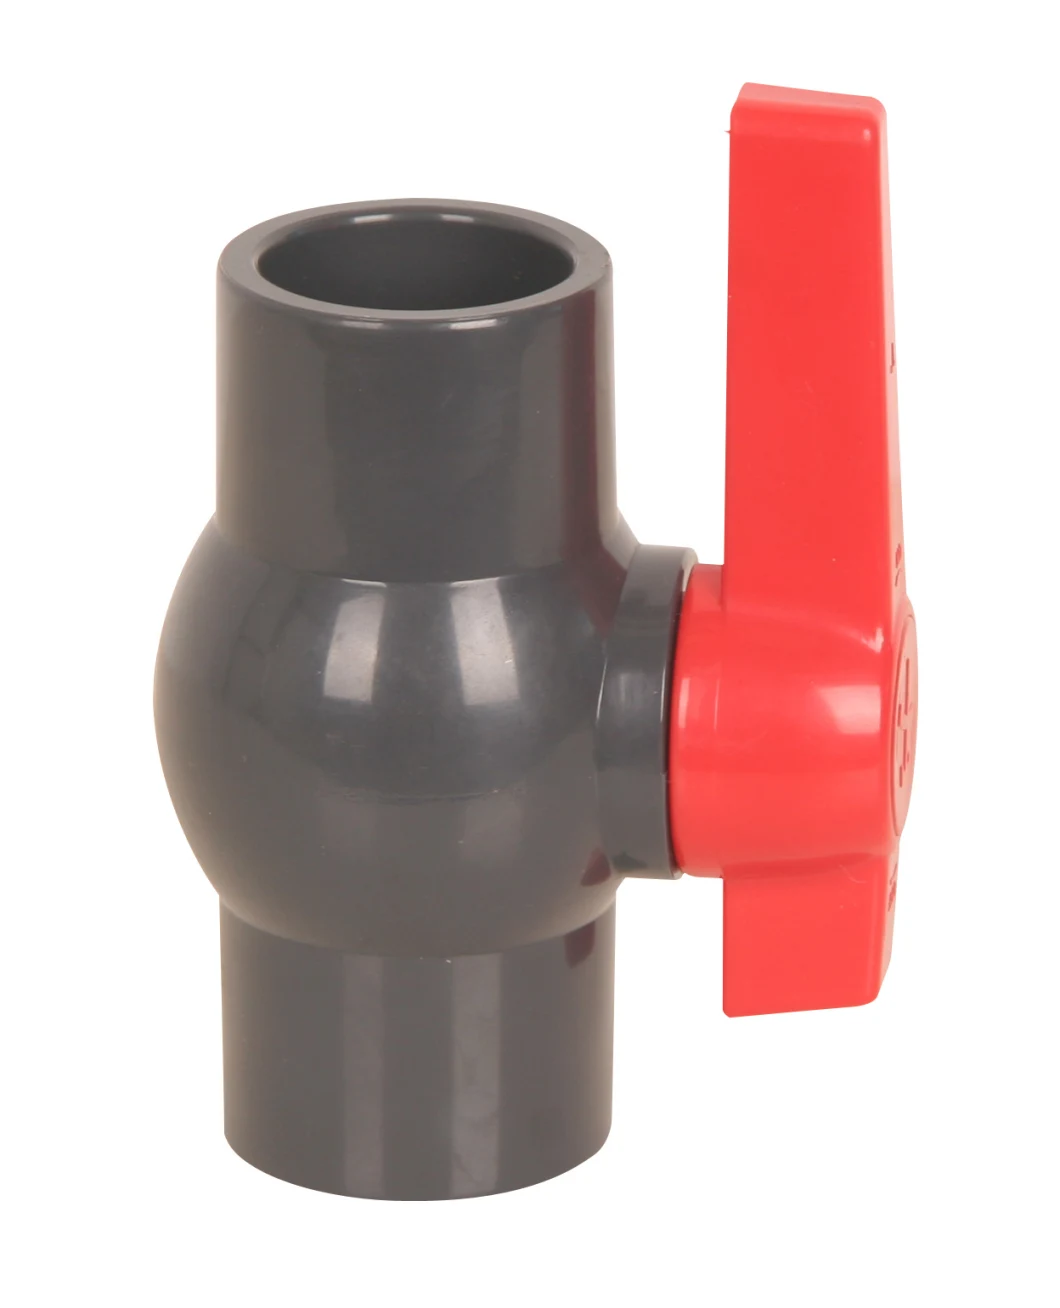 1/2" Pn10 PVC Threaded Ball Valve for Water Supply Water